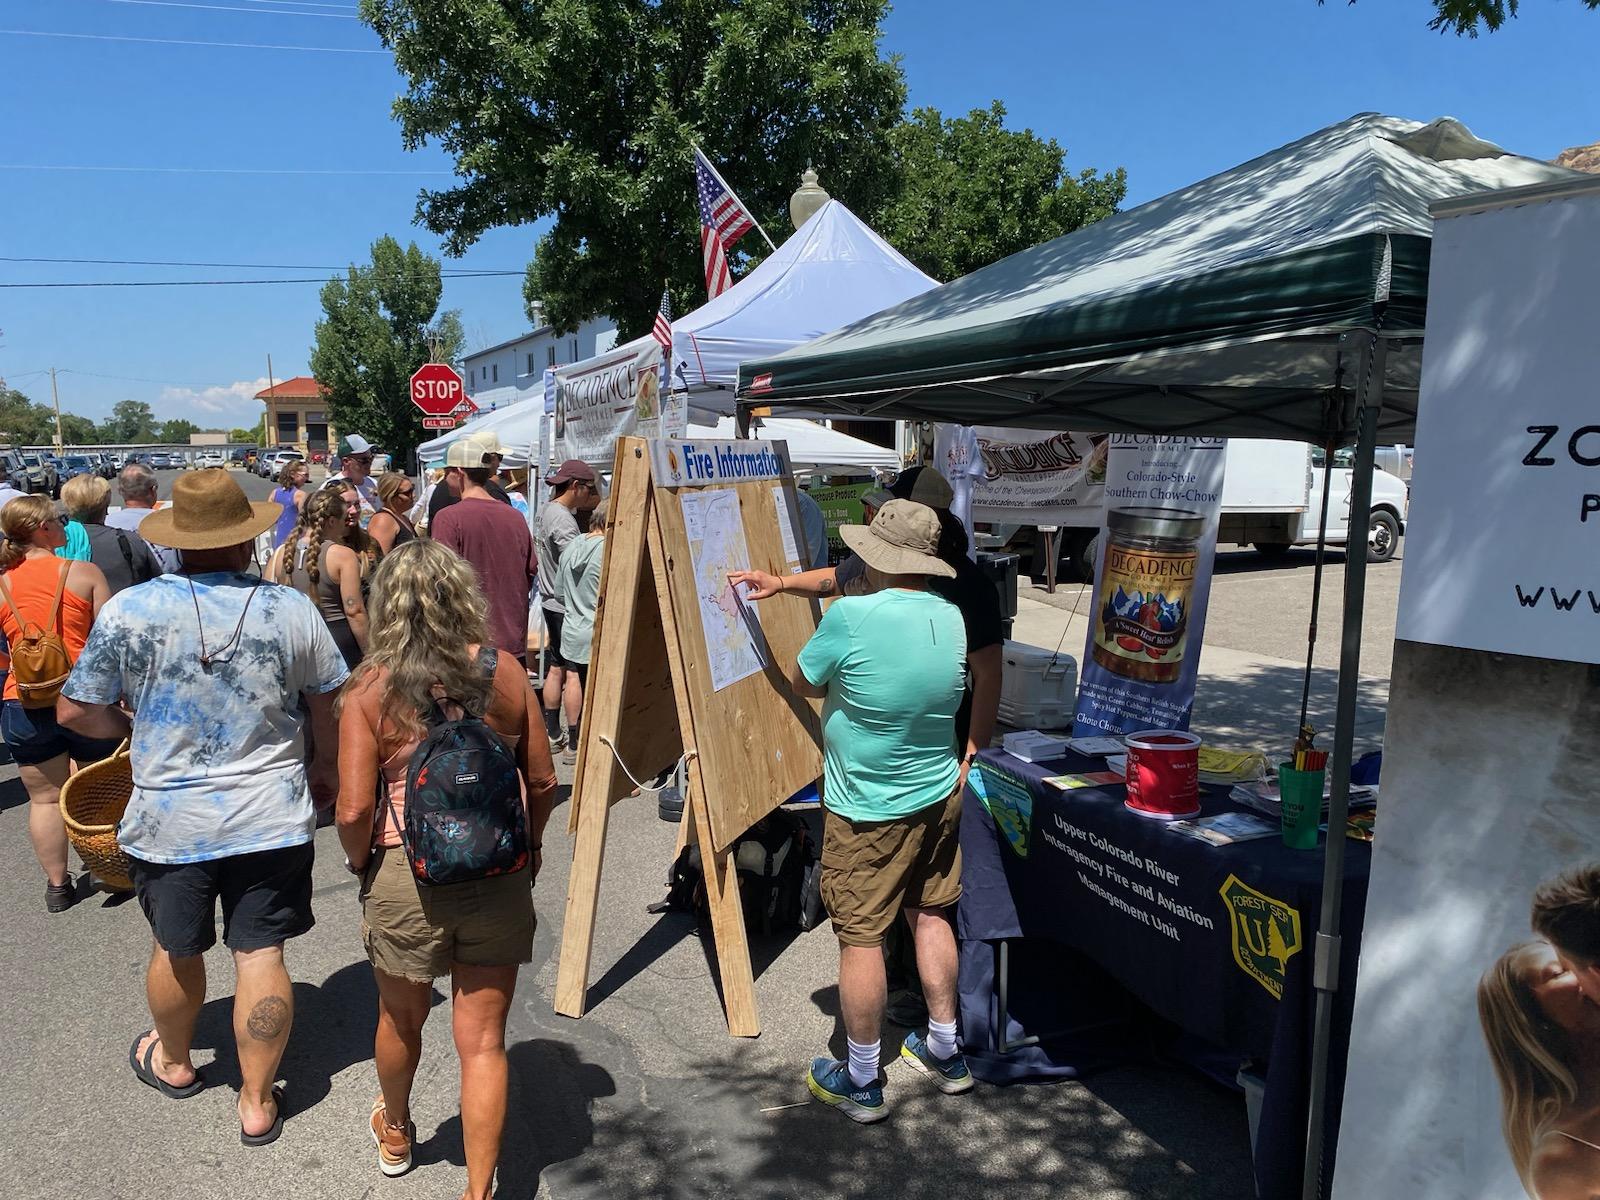 Spring Creek Fire Information booth at Palisade Farmers Market, July 2